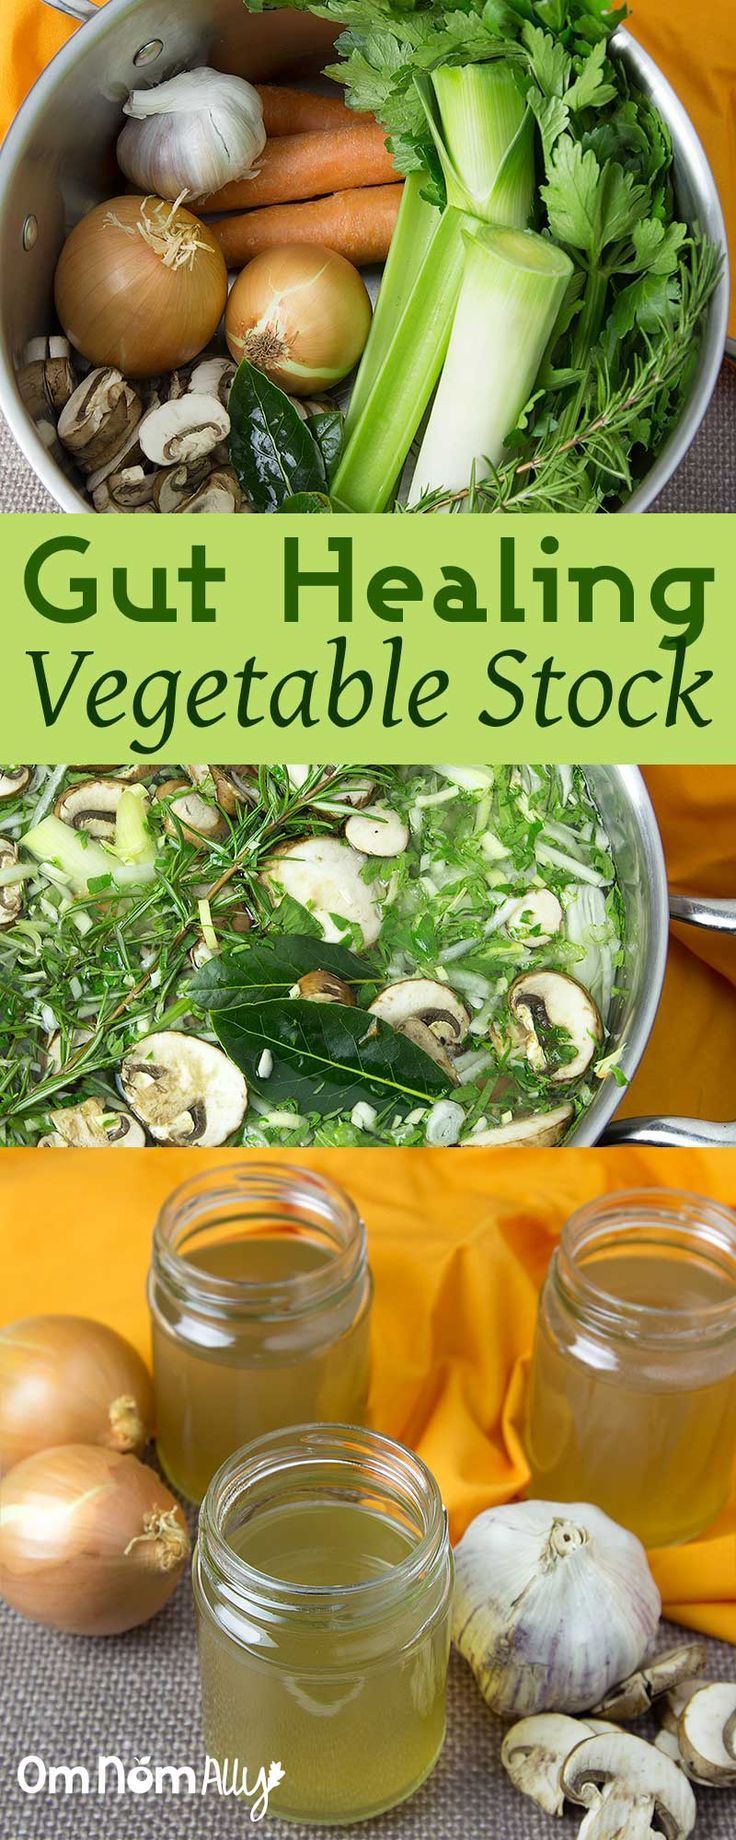 Gut Healing Vegetable Stock @OmNomAlly – Get the gut healing benefits of onions, garlic and mushrooms